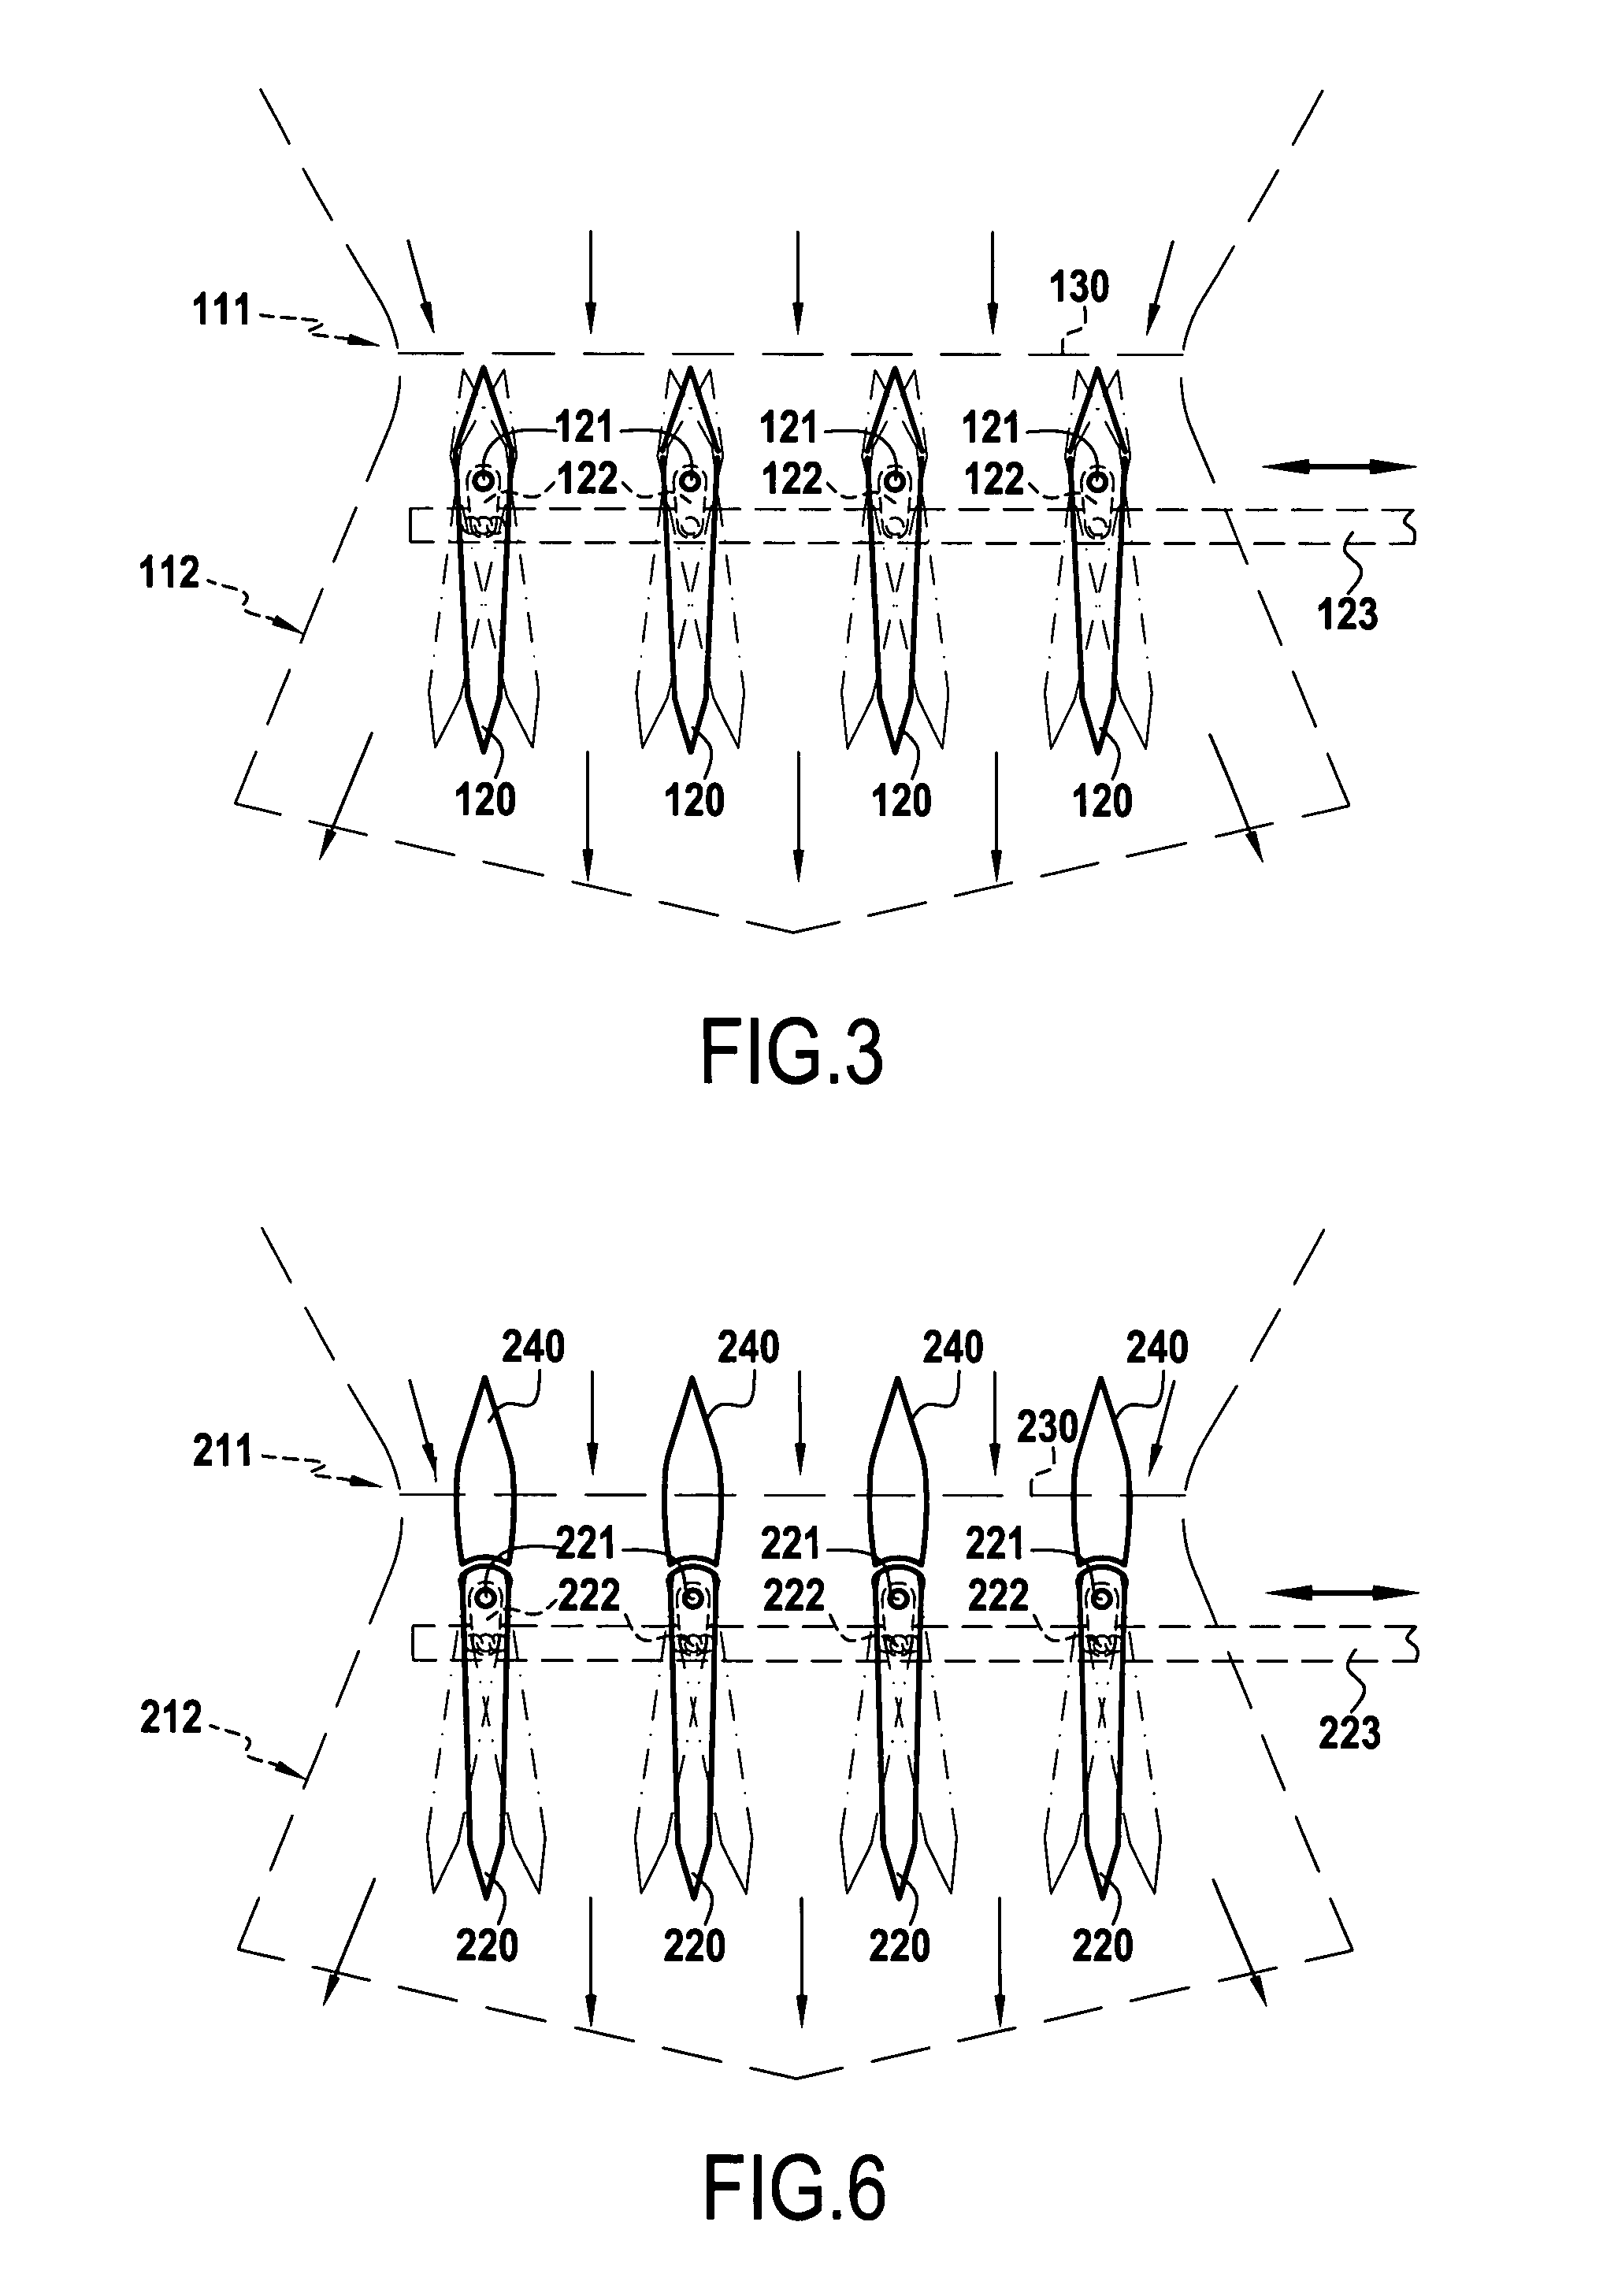 Yaw control device for a nozzle having a rectangular outlet section